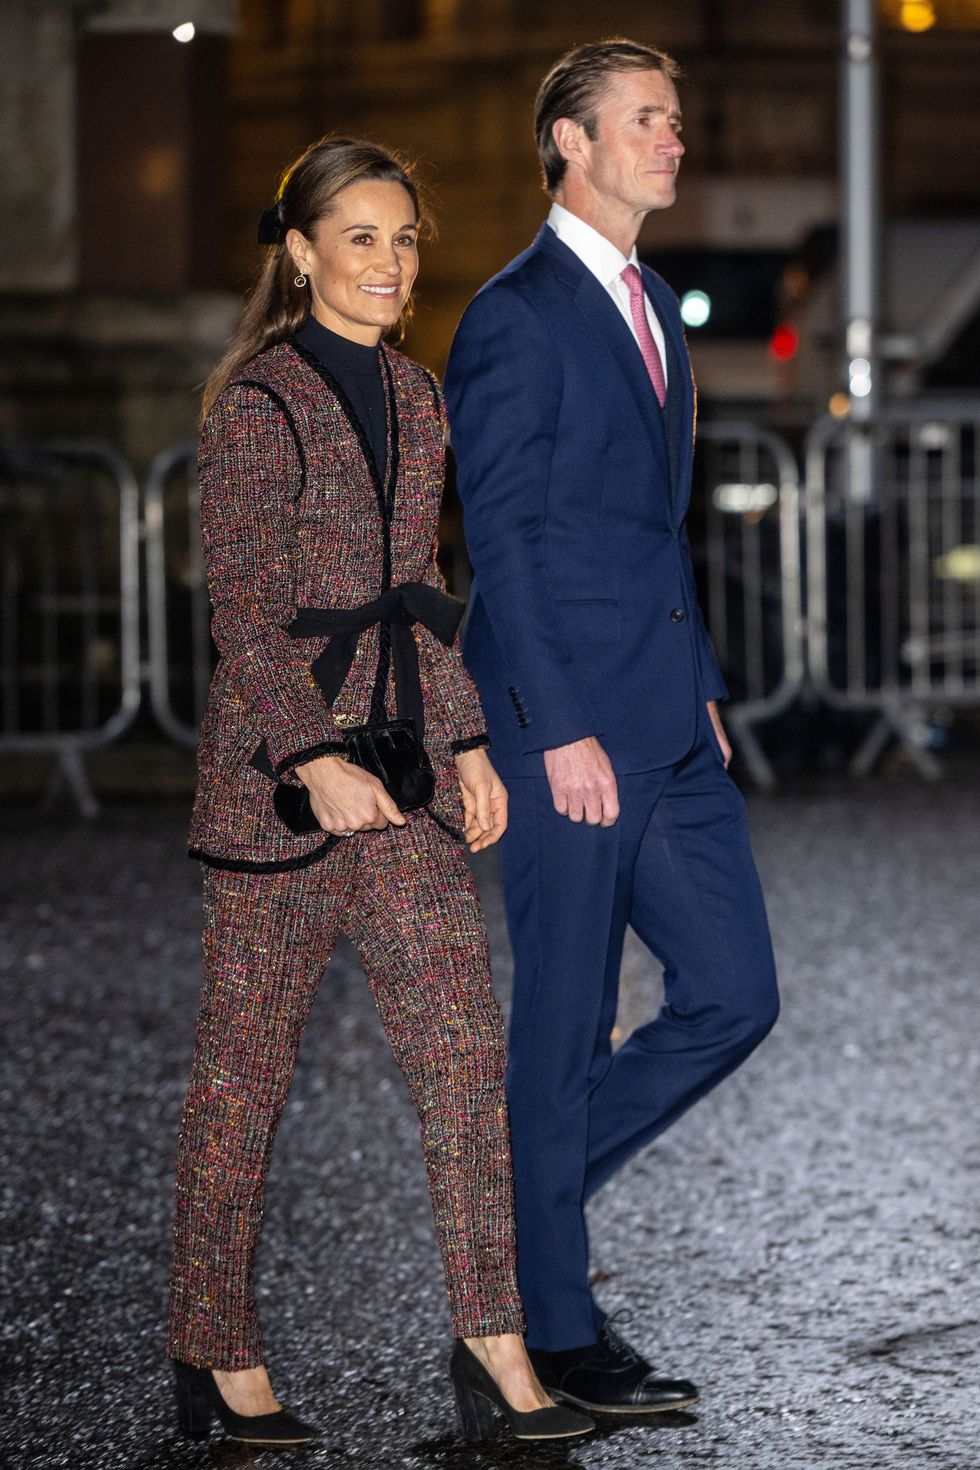 london, united kingdom december 08 pippa middleton and james matthewsattends the together at christmas carol service at westminster abbey in london, united kingdom on december 08, 2023 photo by stringeranadolu via getty images